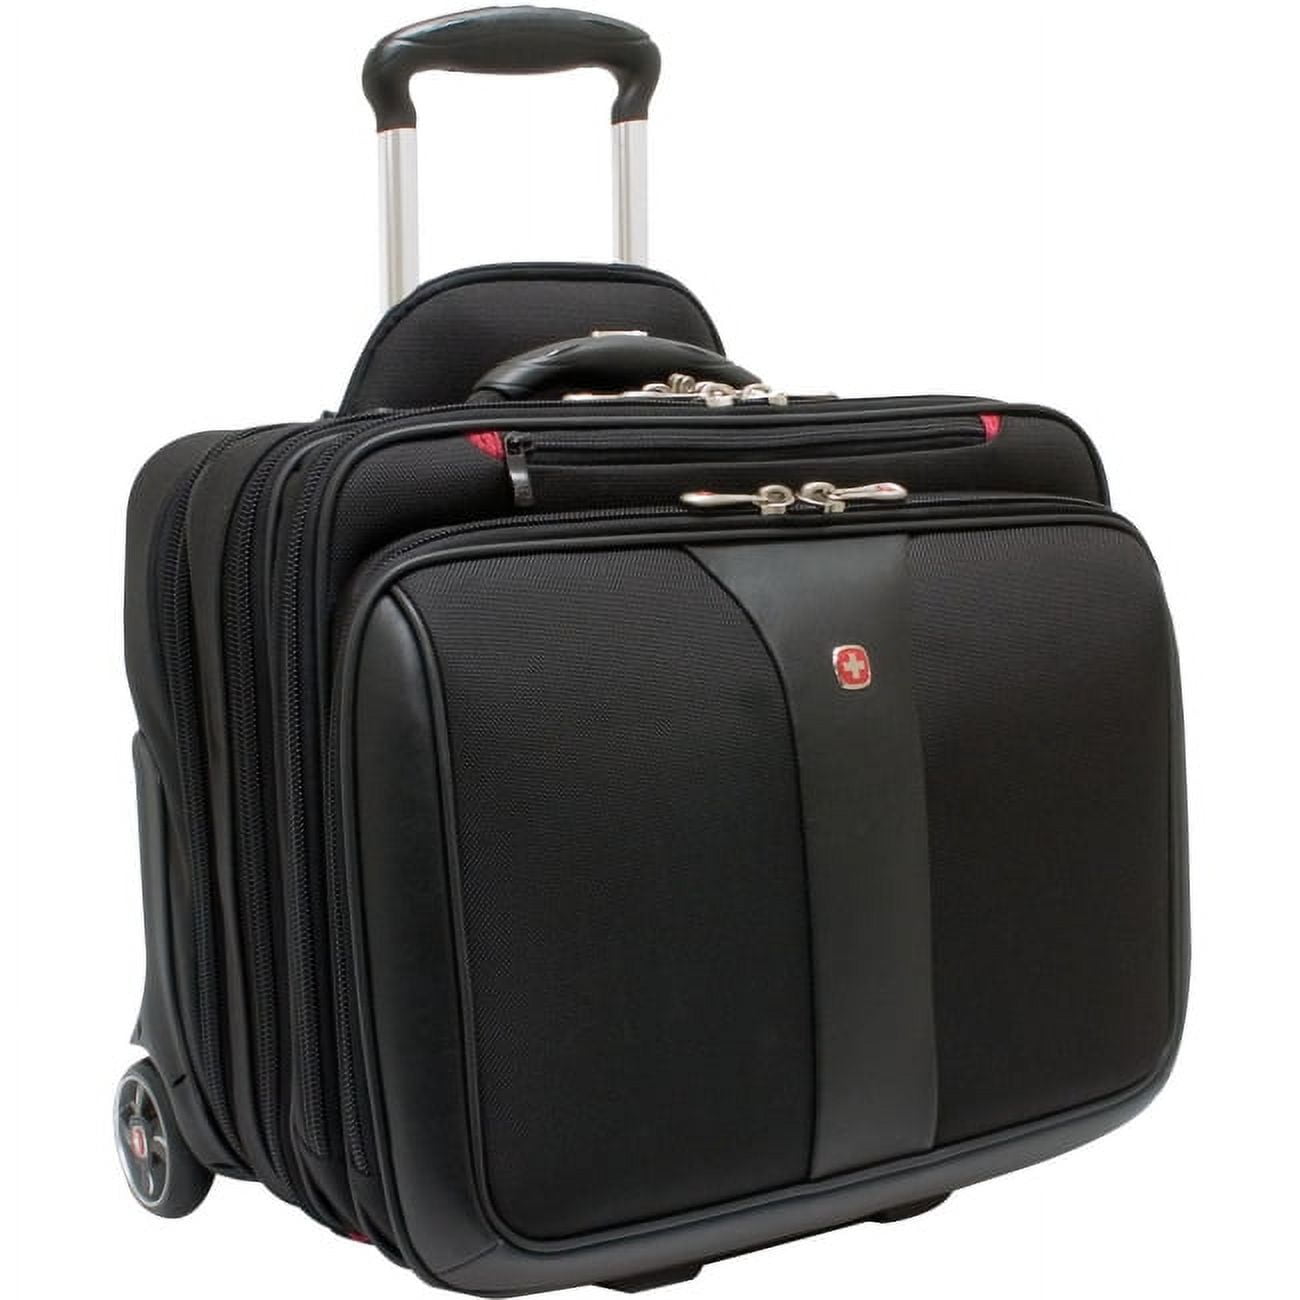 Wenger Swiss Gear Patriot Rolling Luggage Retractable Handle 17" Laptop  Bag